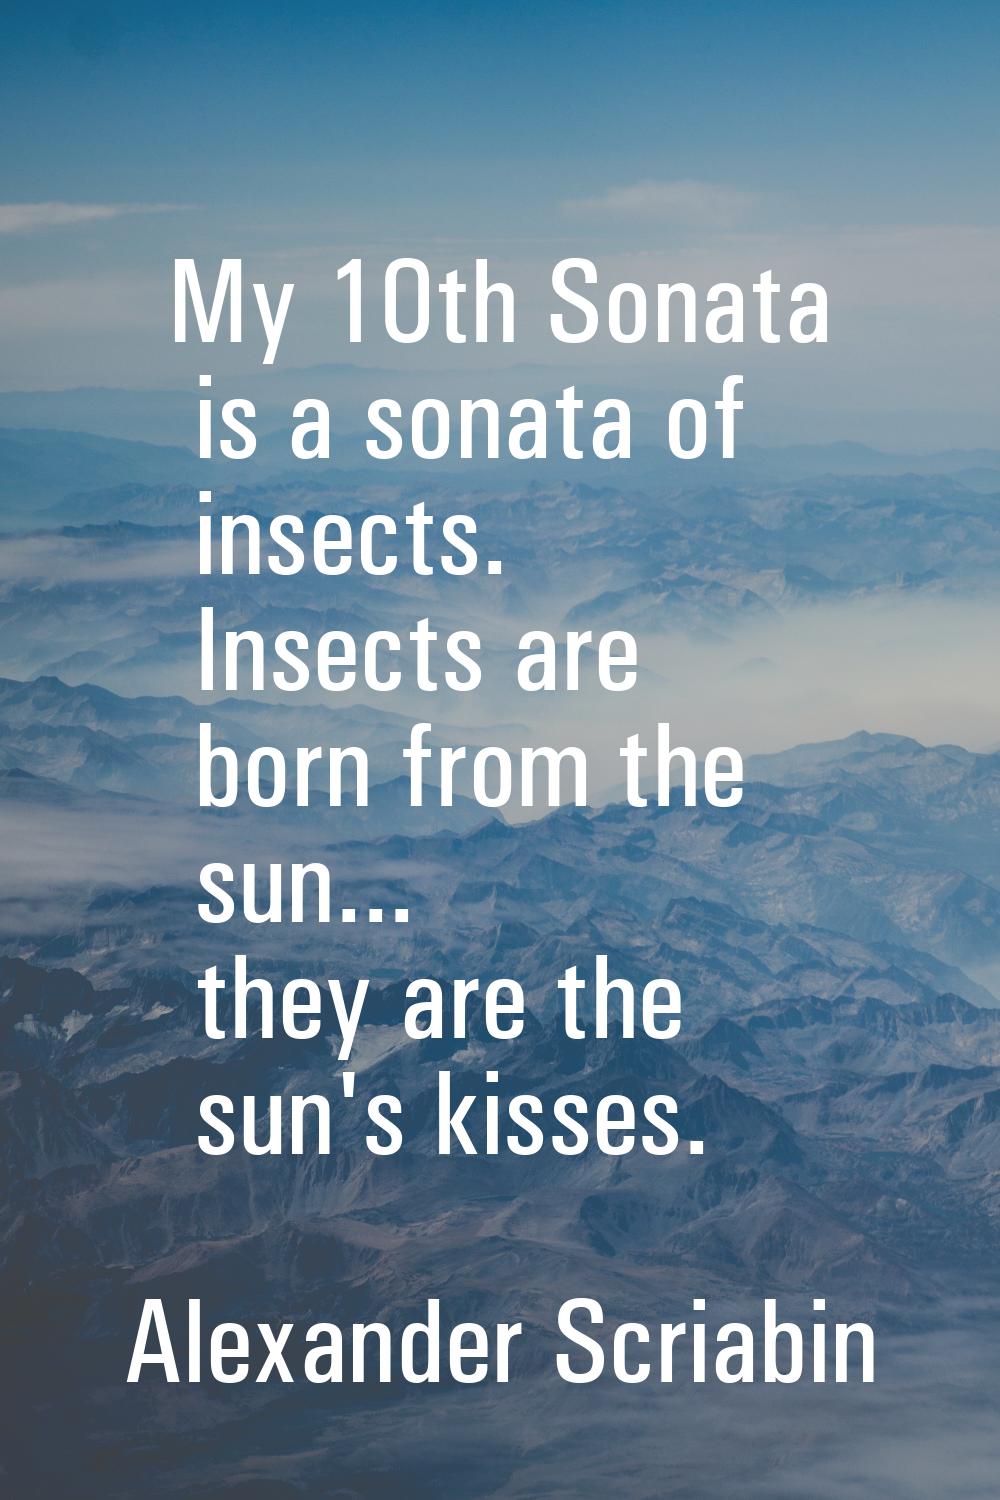 My 10th Sonata is a sonata of insects. Insects are born from the sun... they are the sun's kisses.